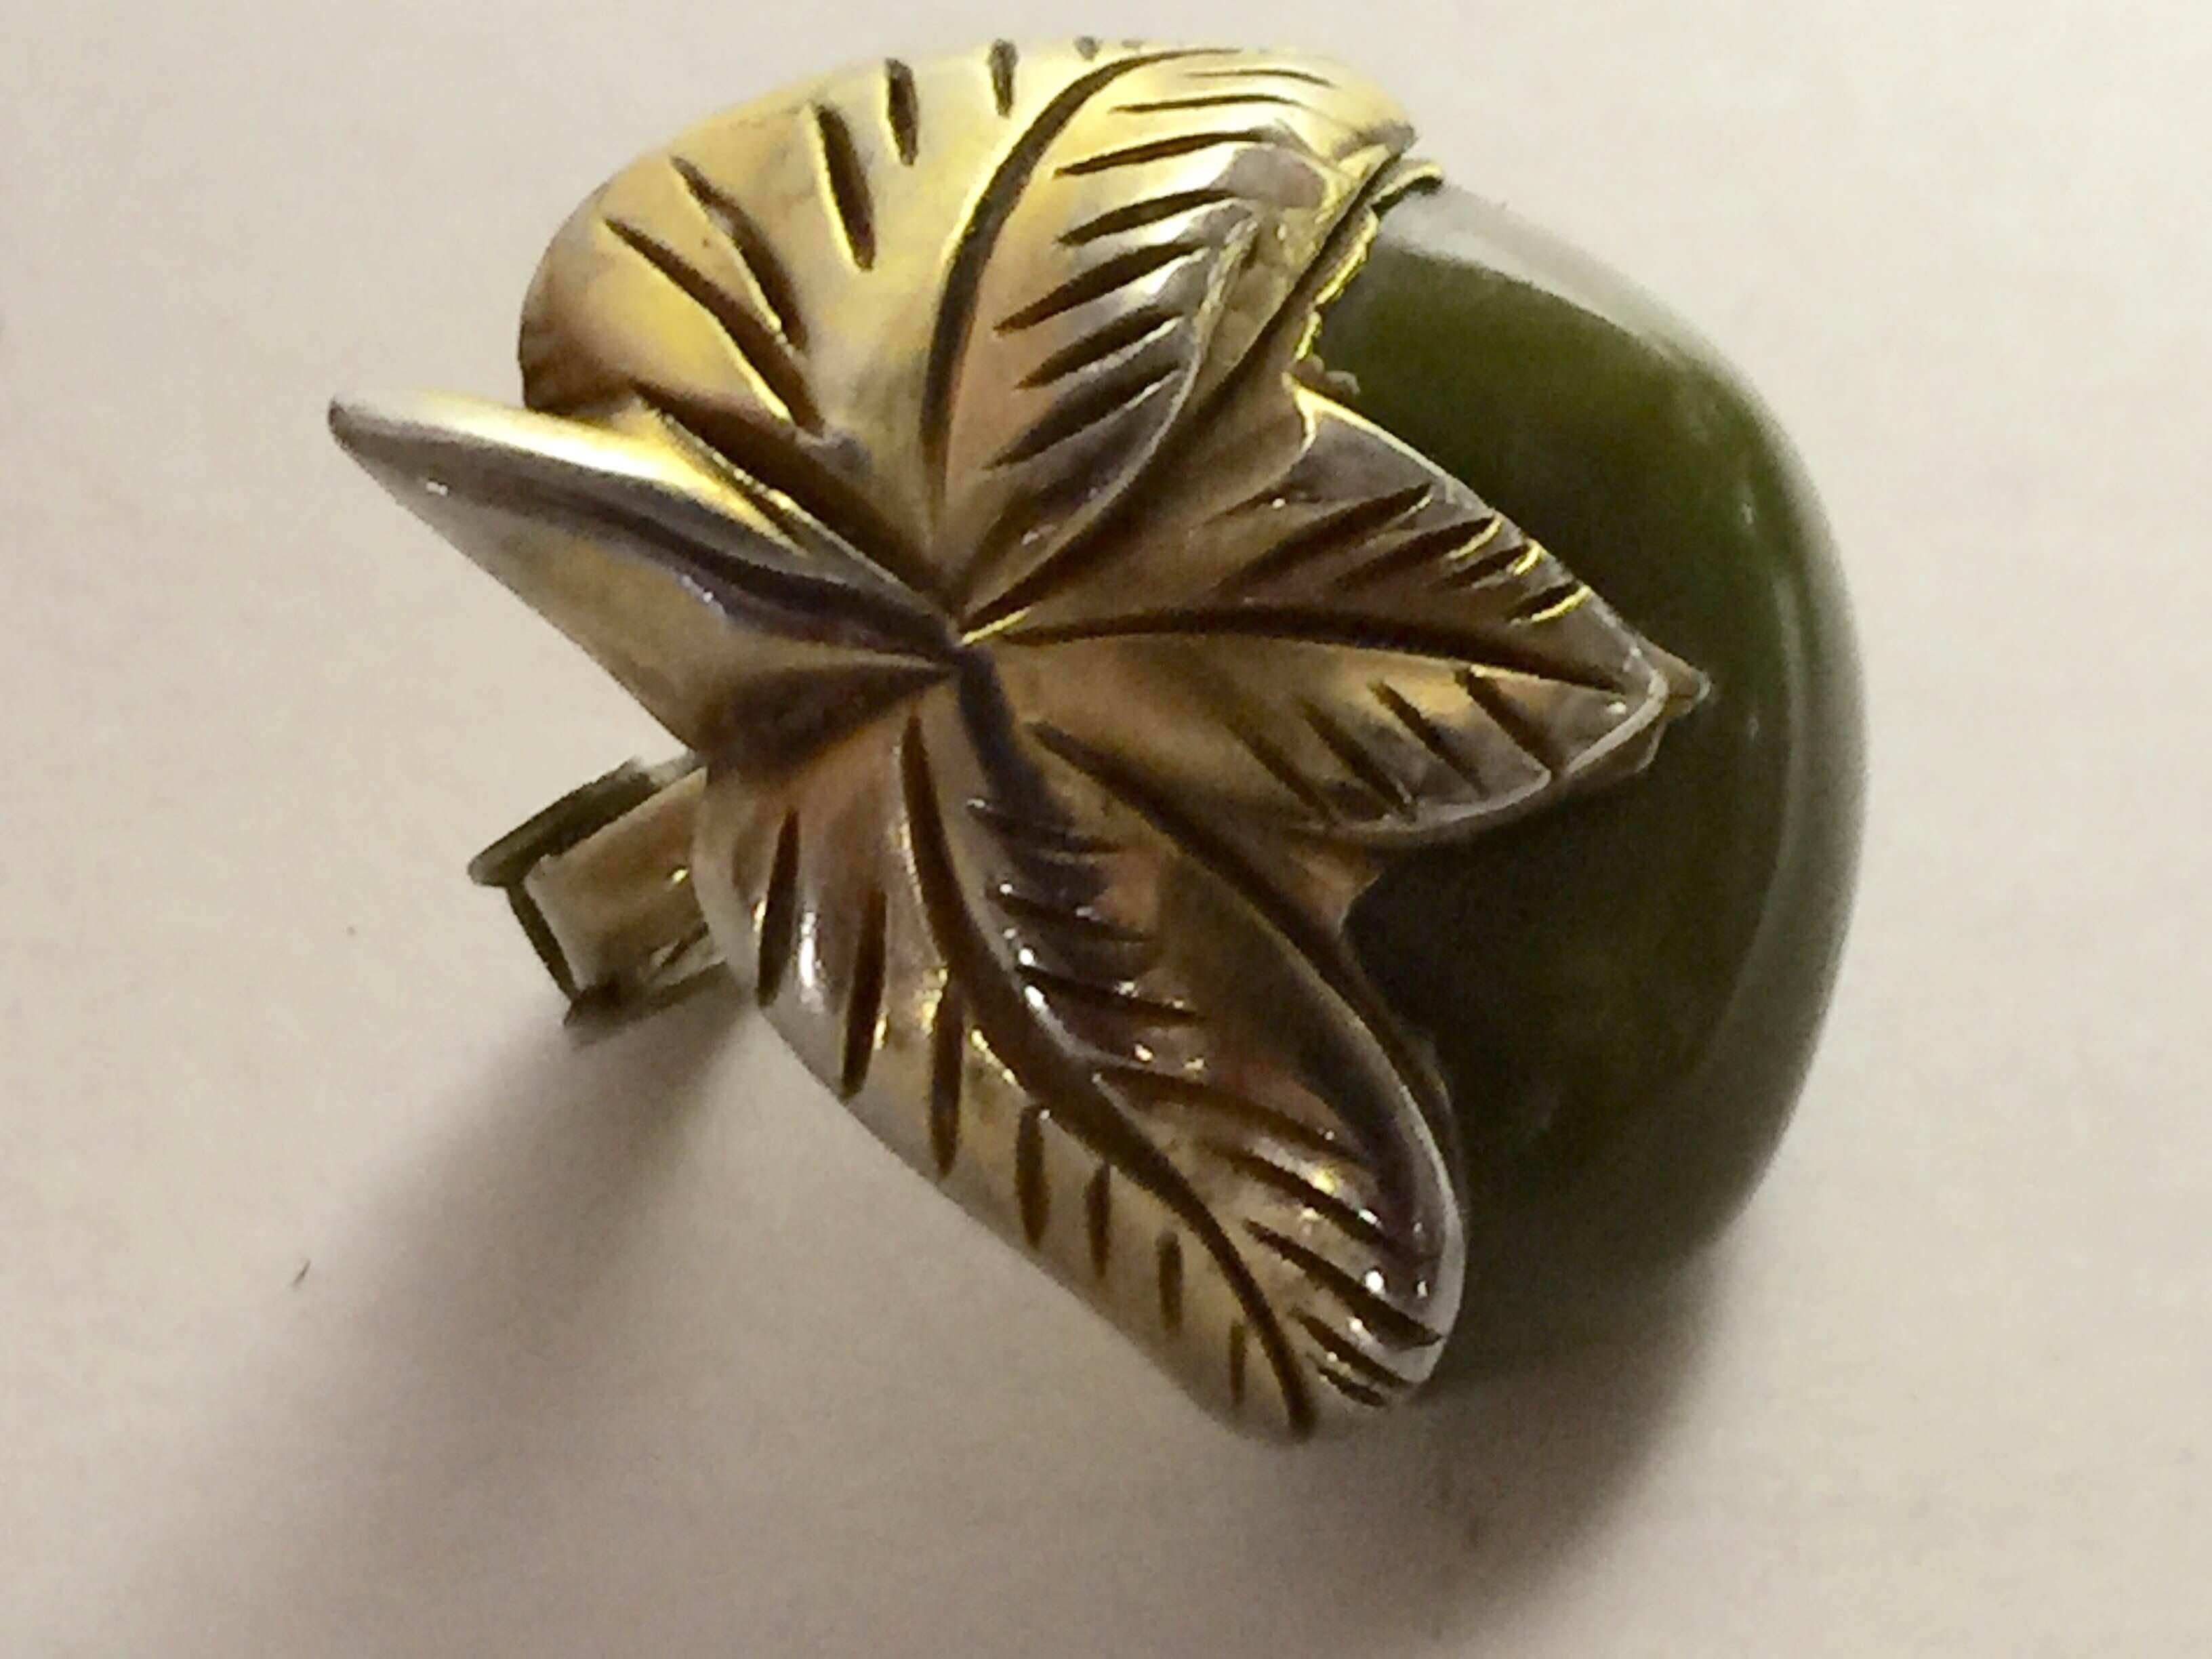 The unusual sub niche category within carved and figural bakelite jewelry pictured here is called CLAD Bakelite. Made in Canada for the more conservative market there, it attempted--- by wrapping gold foil metal around bakelite sometimes obscuring